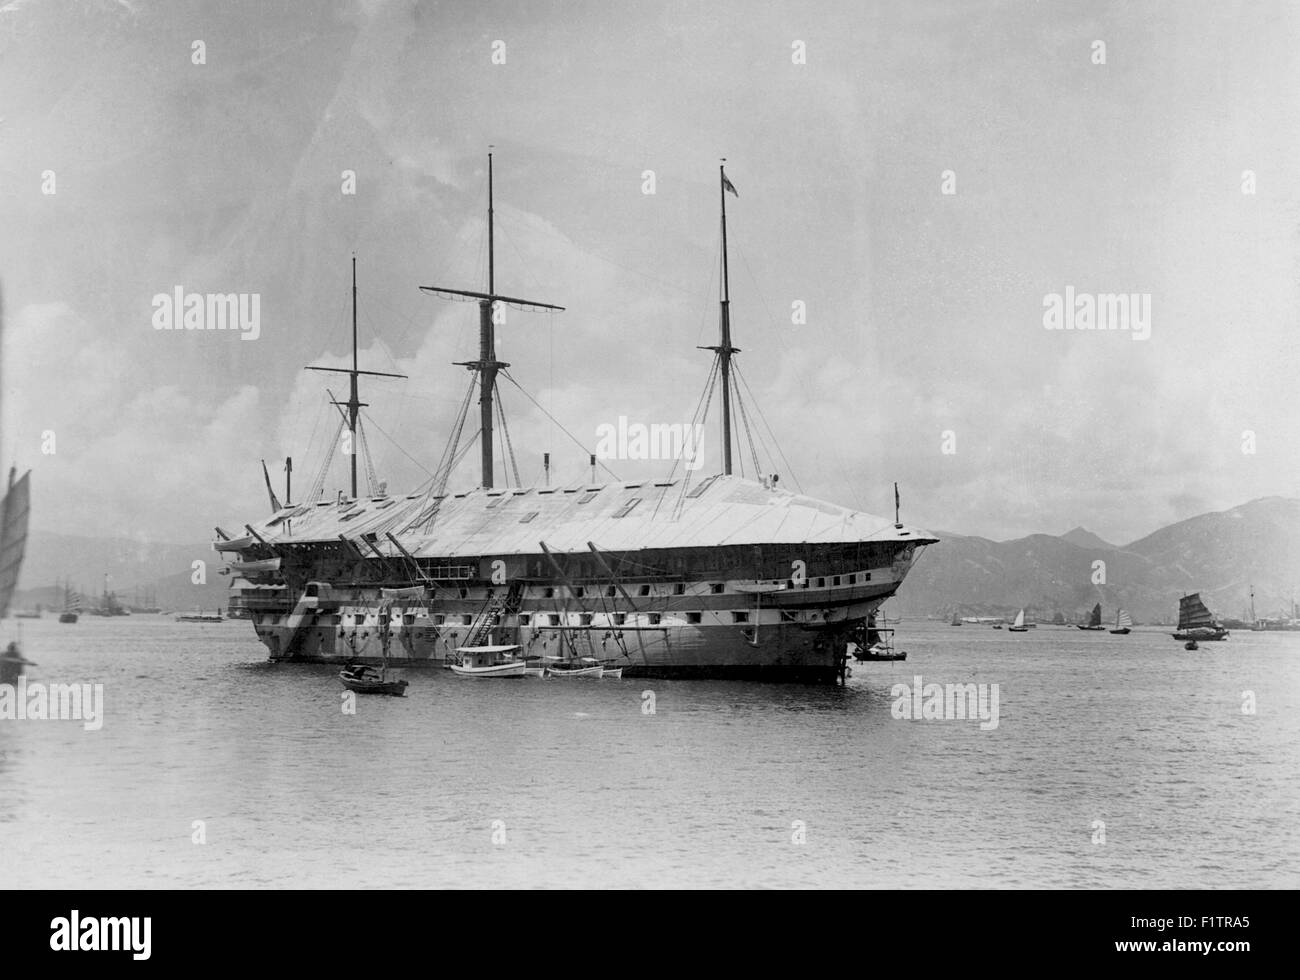 AJAXNETPHOTO. (AJAX VINTAGE COLLECTION) 1873-1887 APPROX. - HONG KONG HARBOUR - WARSHIP - TWO DECK AGAMEMNON CLASS SCREW POWERED 91 GUN HOSPITAL AND RECEIVING SHIP H.M.S. VICTOR EMMANUEL MOORED IN MAN-OF-WAR ANCHORAGE HONG KONG HARBOUR IN LATE 19TH CENTURY. BUILT AND NAMED ORIGINALLY AS SECOND RATE HMS REPULSE AT PEMBROKE DOCKYARD AND LAUNCHED IN 1855. SOLD IN 1899. PHOTO:AJAX VINTAGE PICTURE LIBRARY REF:AVL 1873 1 Stock Photo